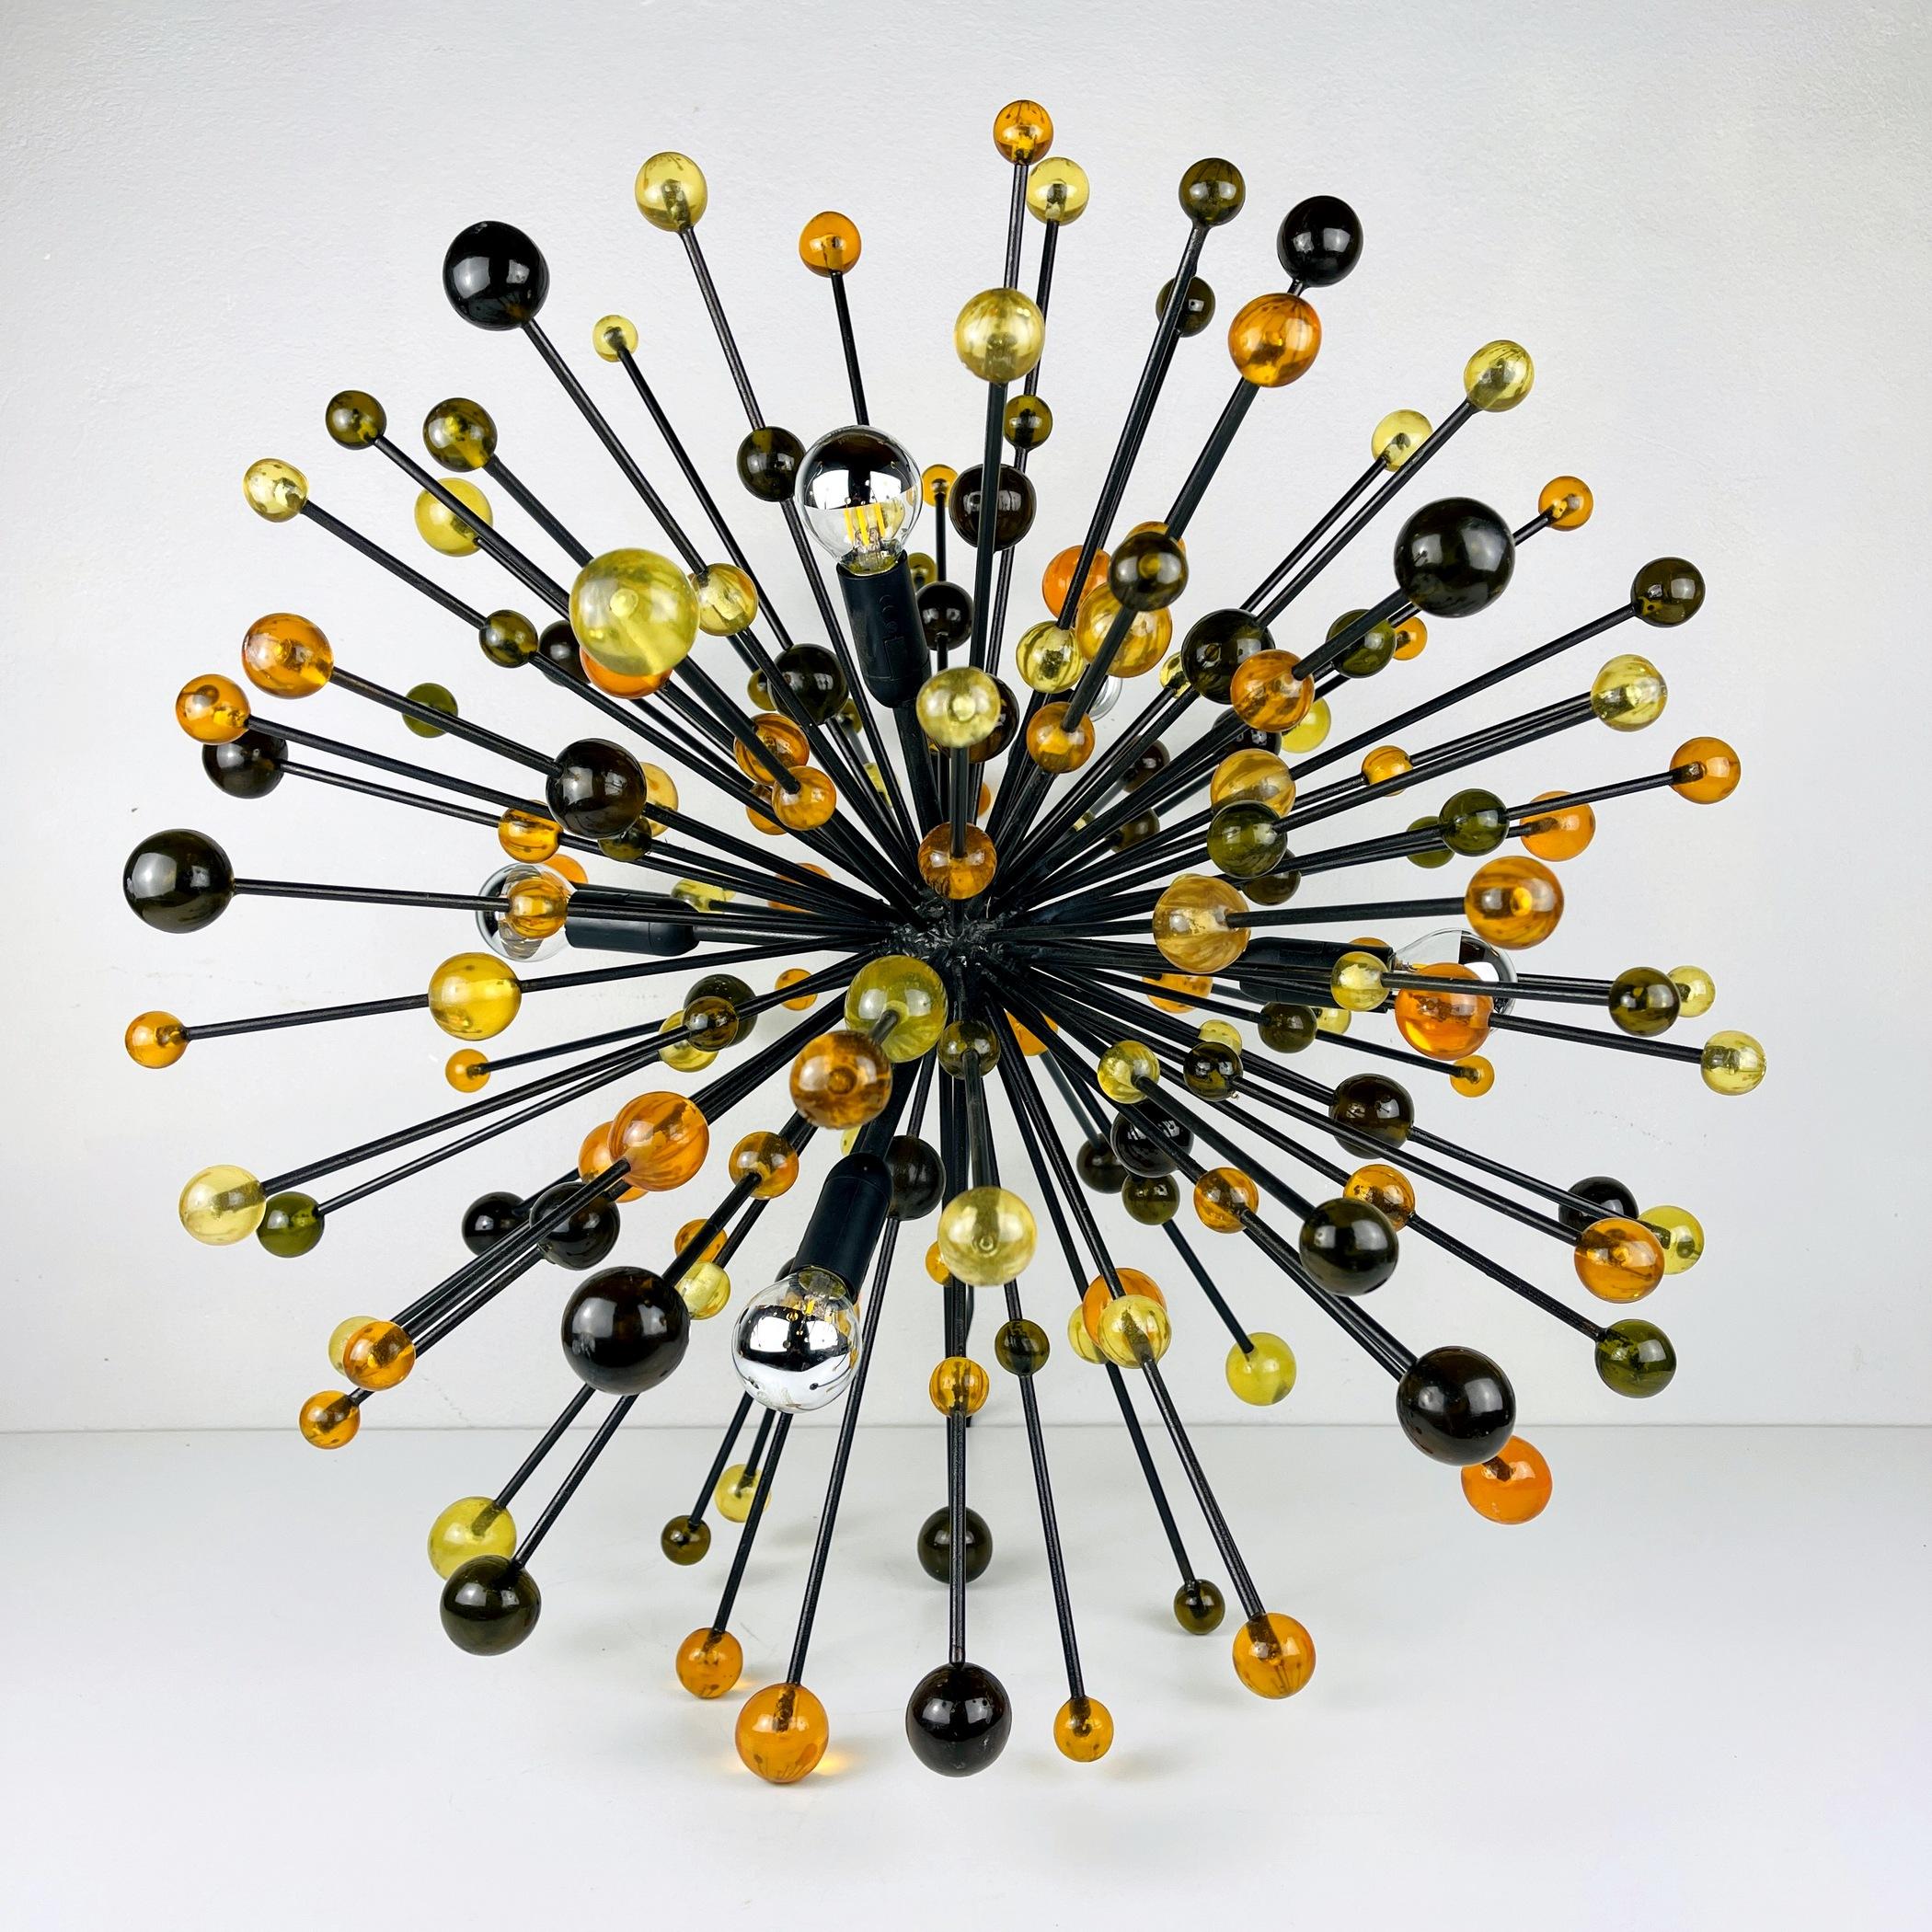 Rare and very unusual table or floor lamp Sputnik.
Made in Italy in the 1970s.
Rays are attached to the central ball, on which there are yellow, orange, green plastic balls. The lamp stands on the rays.
Can be used as a table or floor lamp. It